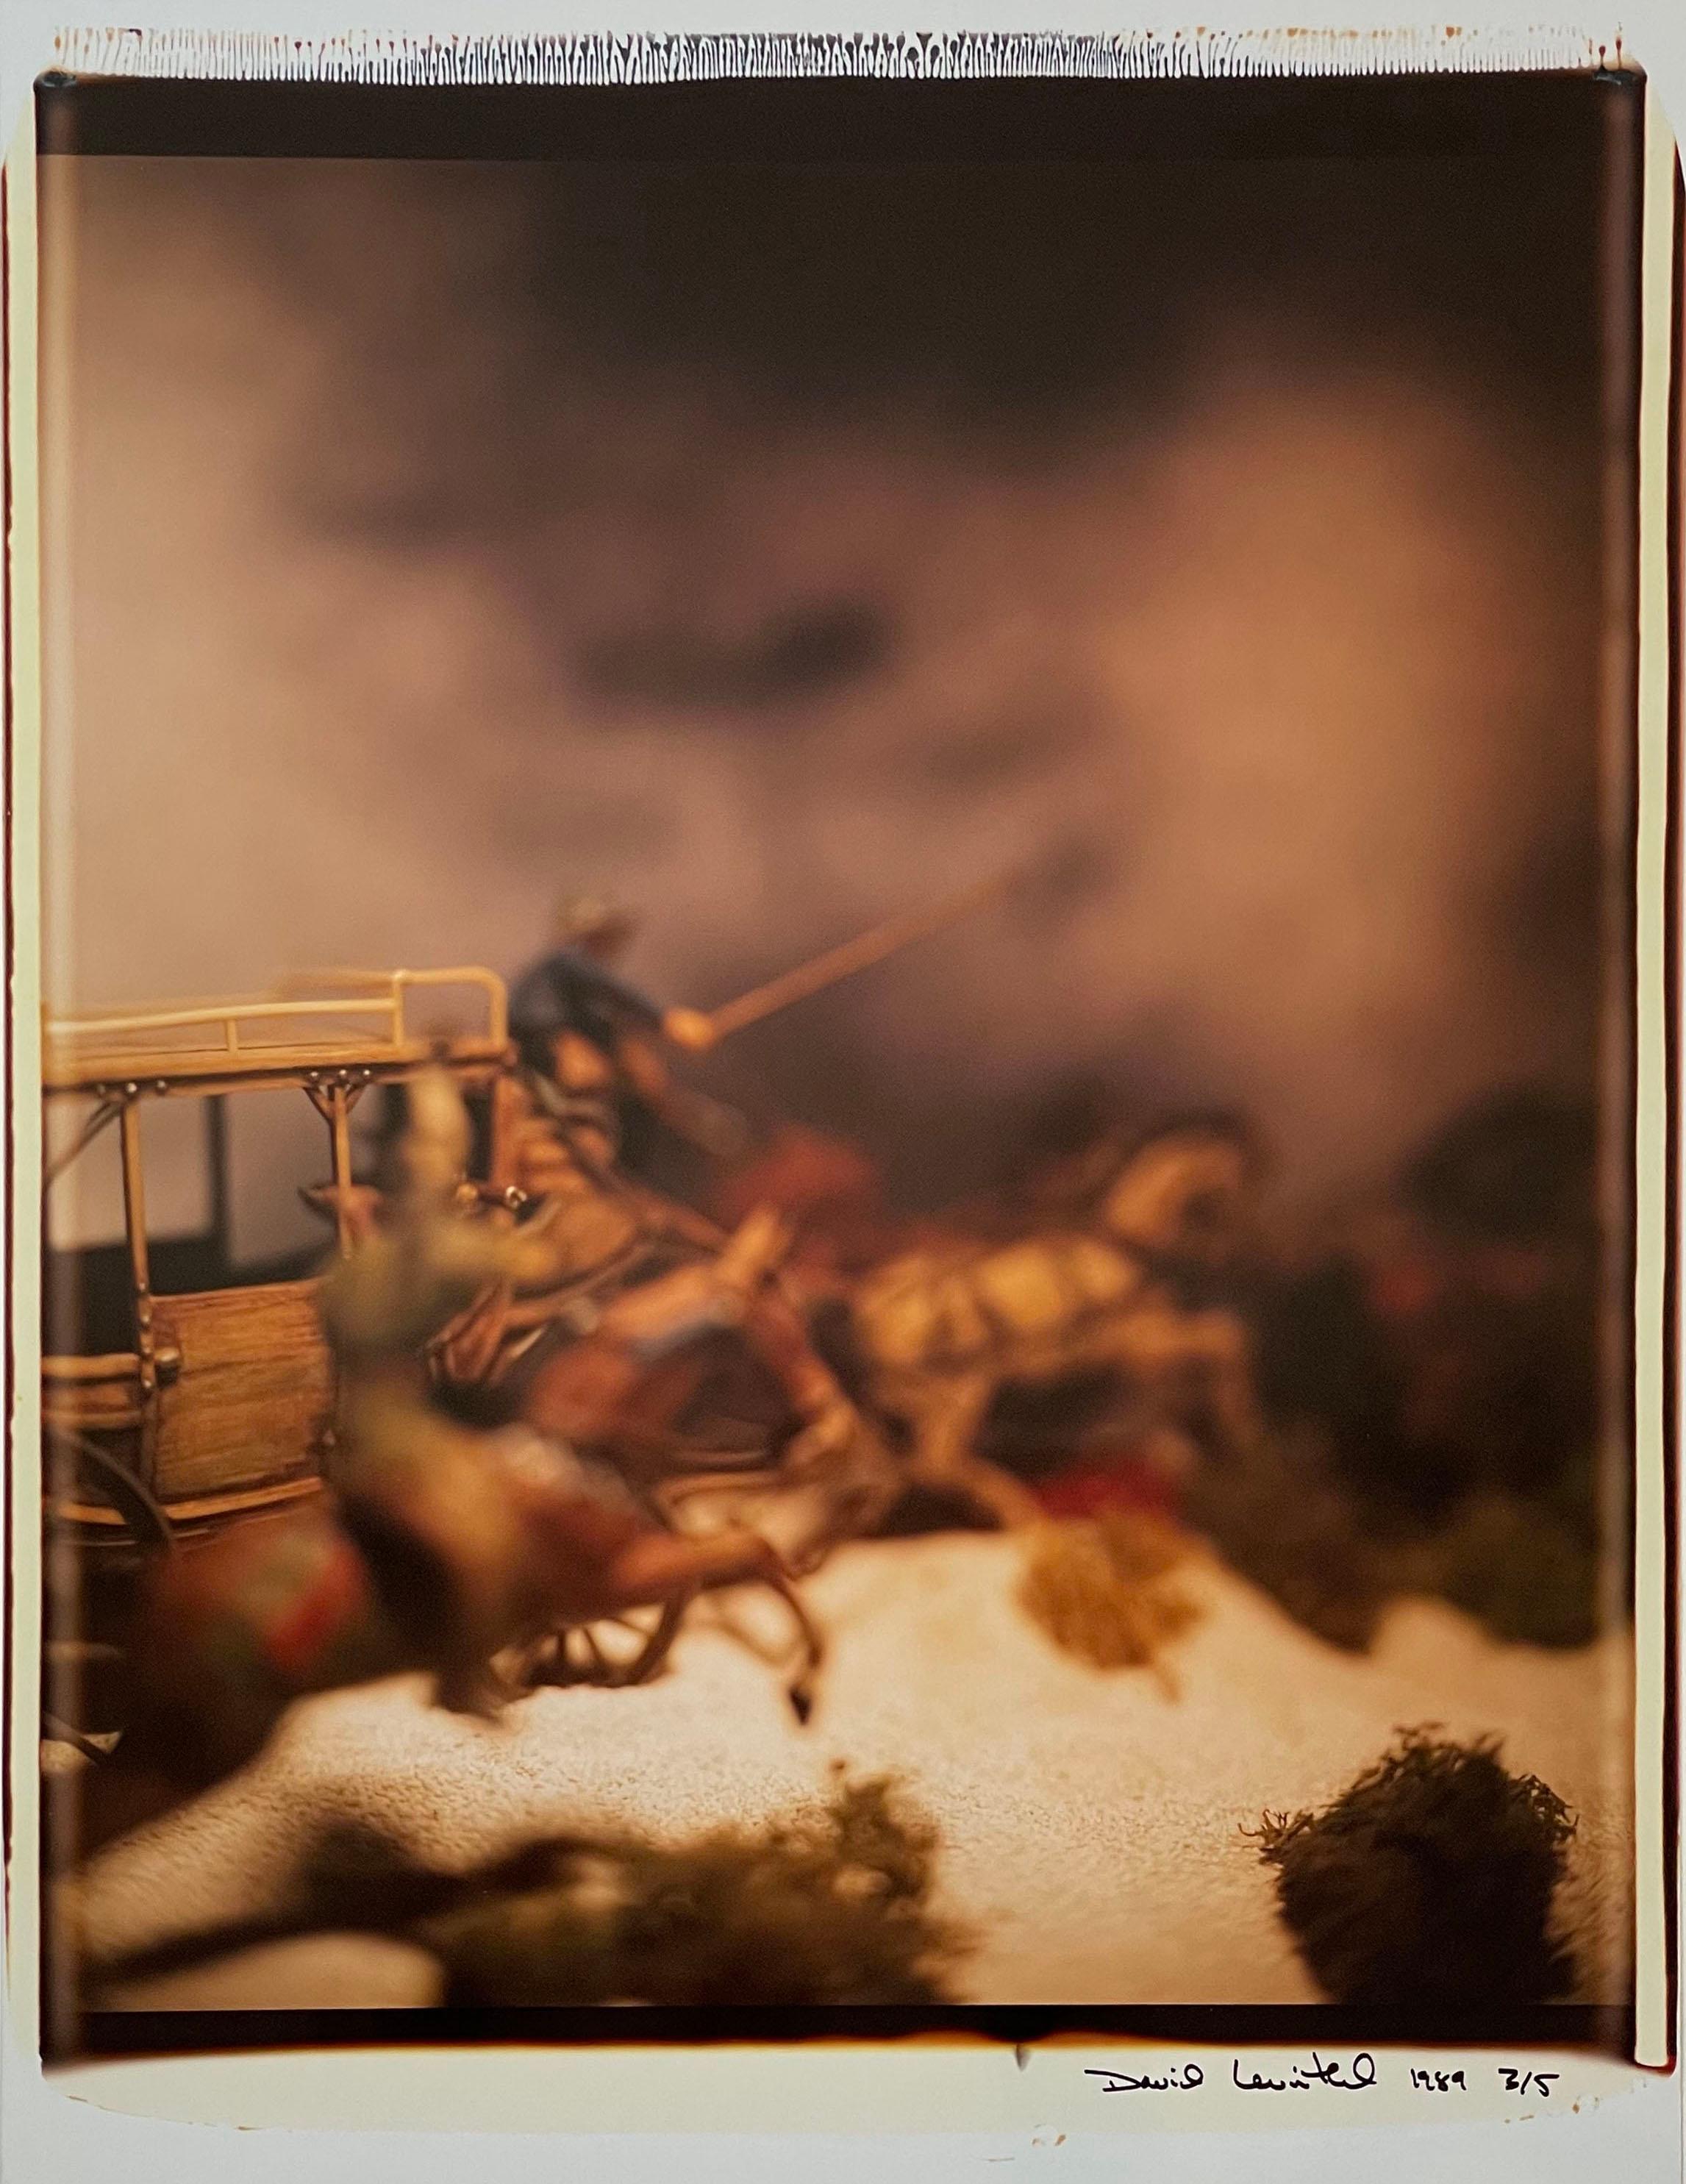 David Levinthal Color Photograph - Untitled from Wild West (89-PC-C-8)